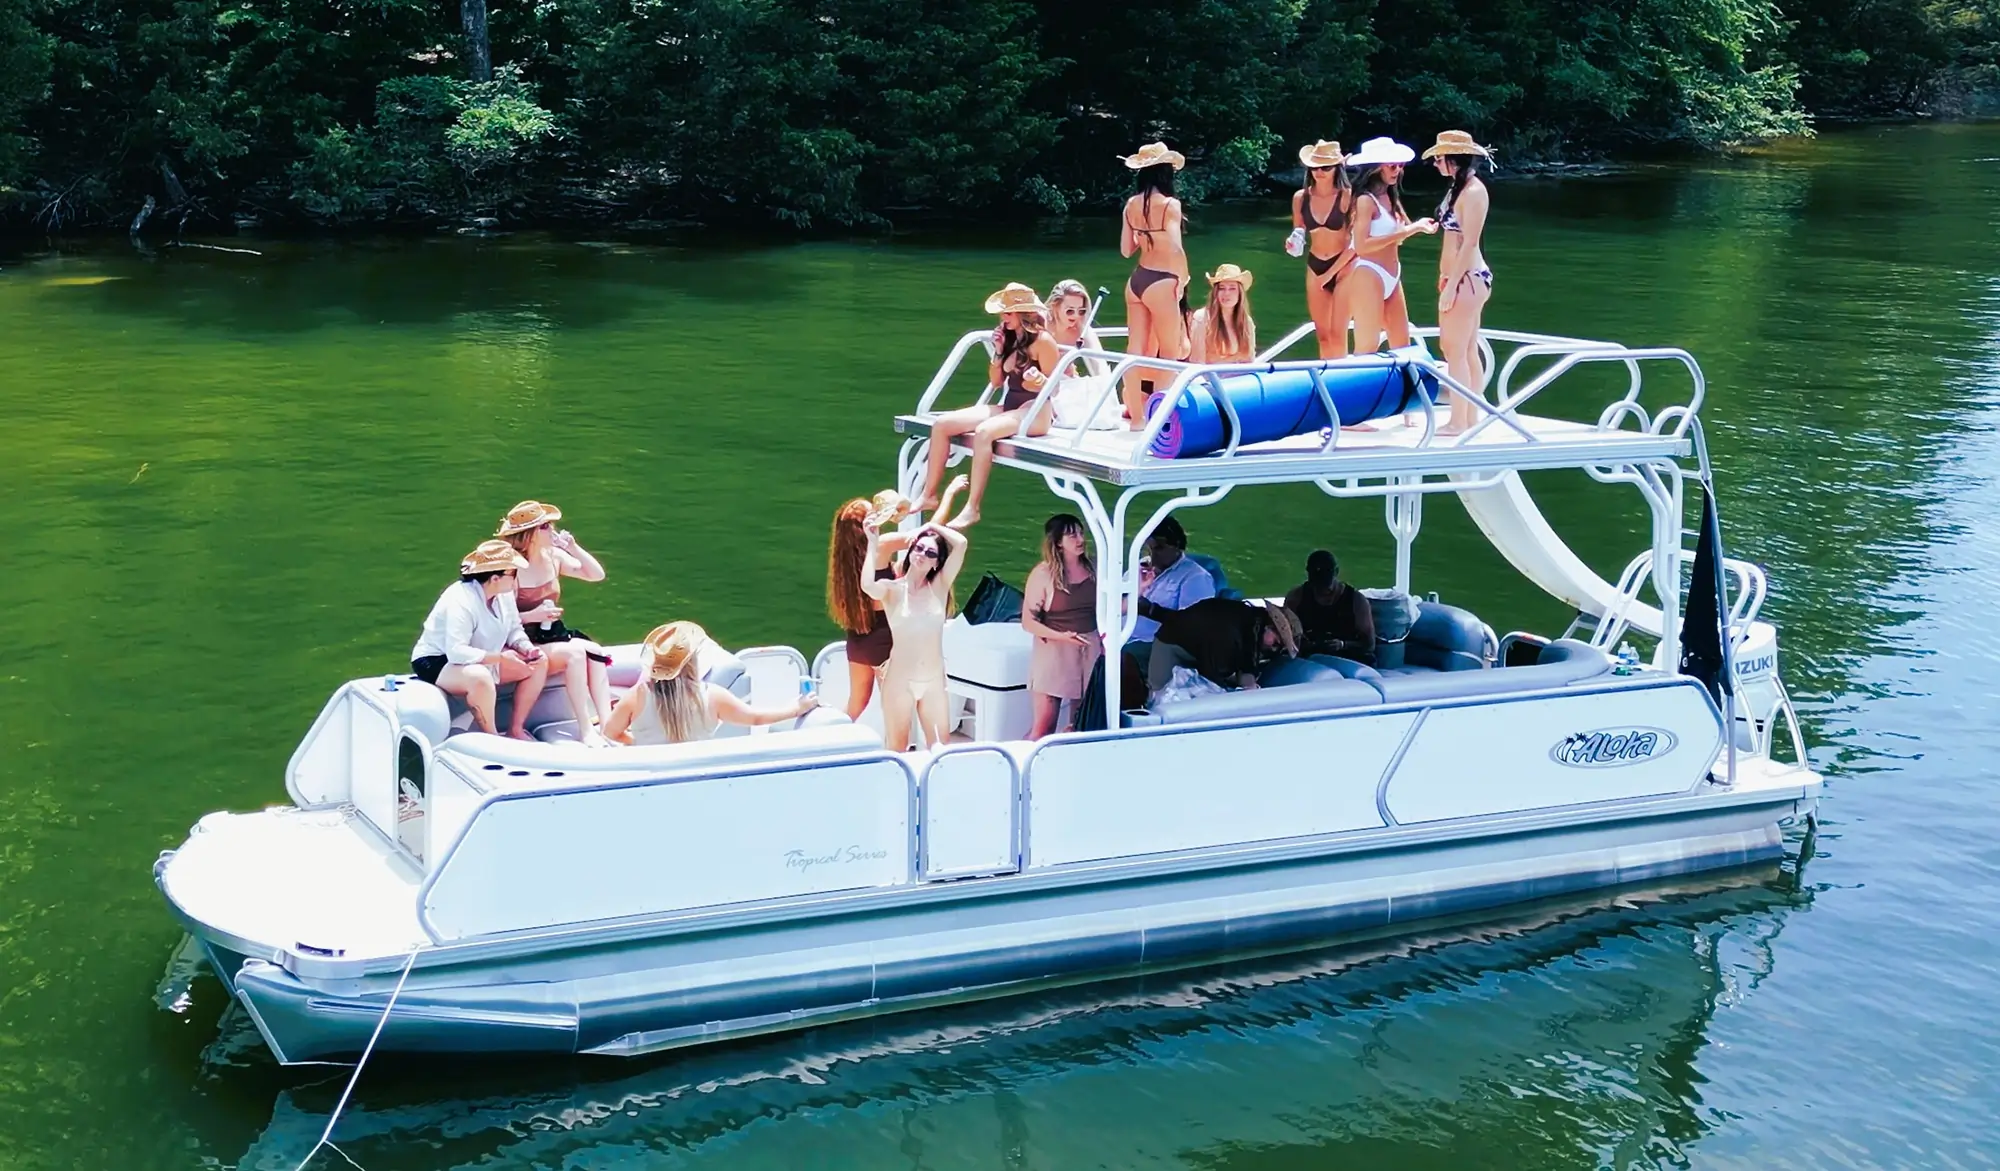 bachelorette party onboard a 30' slide pontoon boat they rented from rowdy boats in nashville on percy priest lake